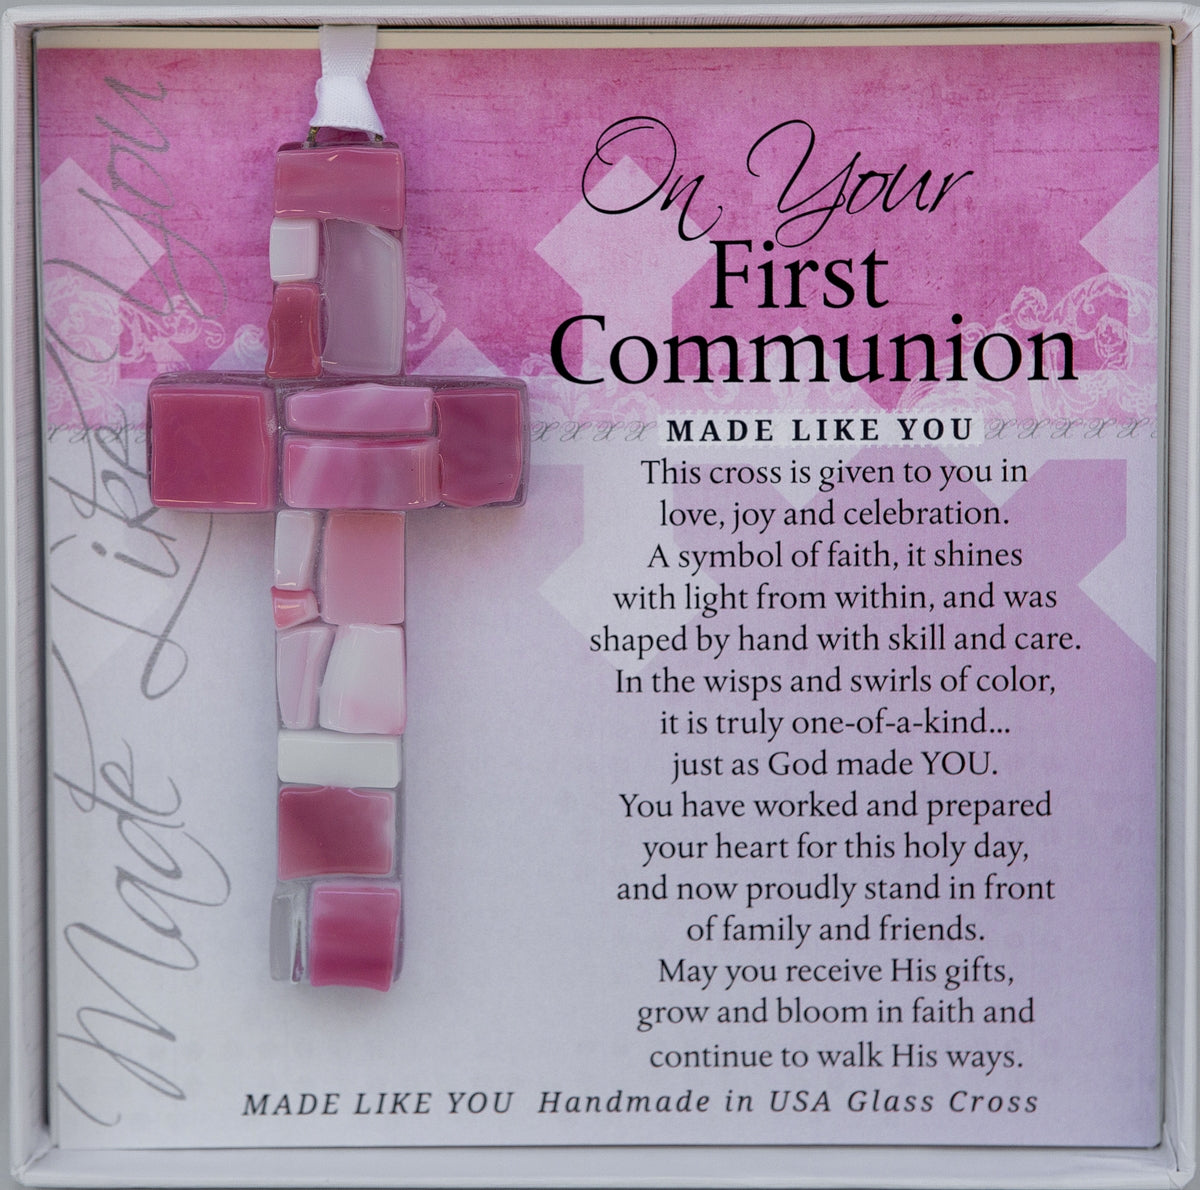 First Communion Gift - Handmade 4" pink mosaic glass cross and "On Your First Communion" sentiment in white box with clear lid.